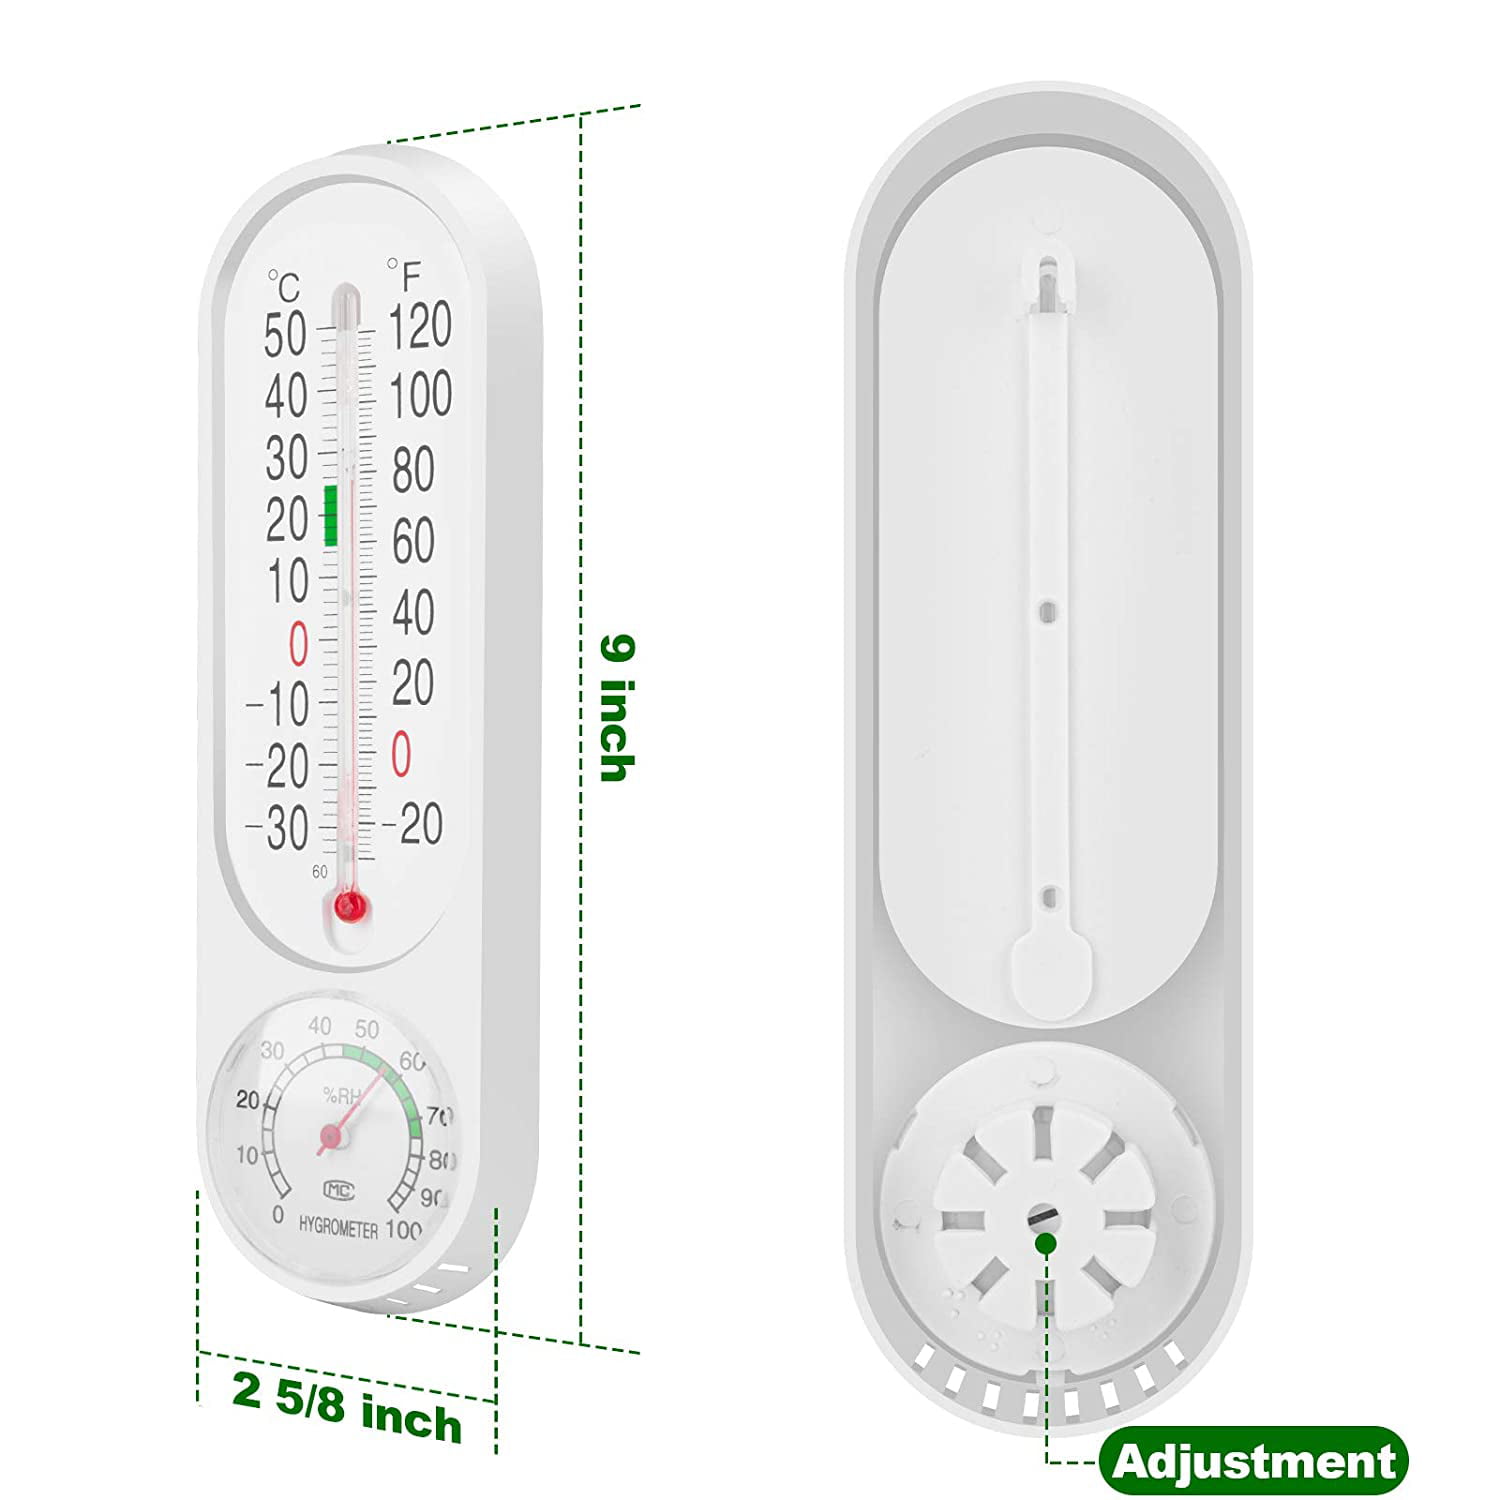 New Multipurpose A7 Thermometer Meters Hygrometer Thermometer Humidity Meter2019 